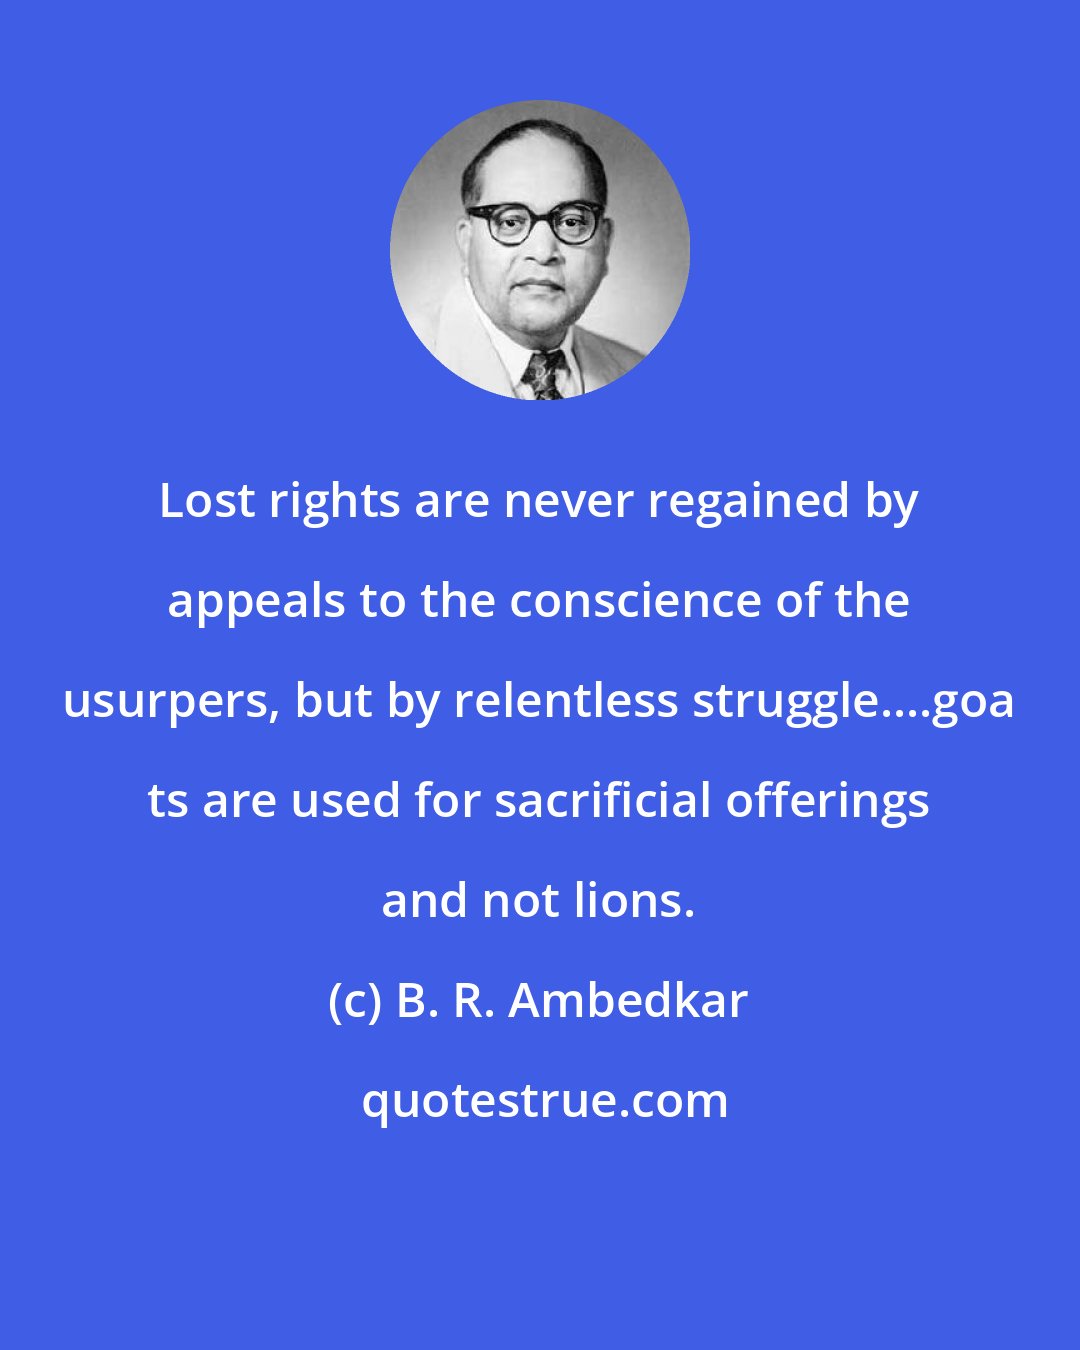 B. R. Ambedkar: Lost rights are never regained by appeals to the conscience of the usurpers, but by relentless struggle....goa ts are used for sacrificial offerings and not lions.